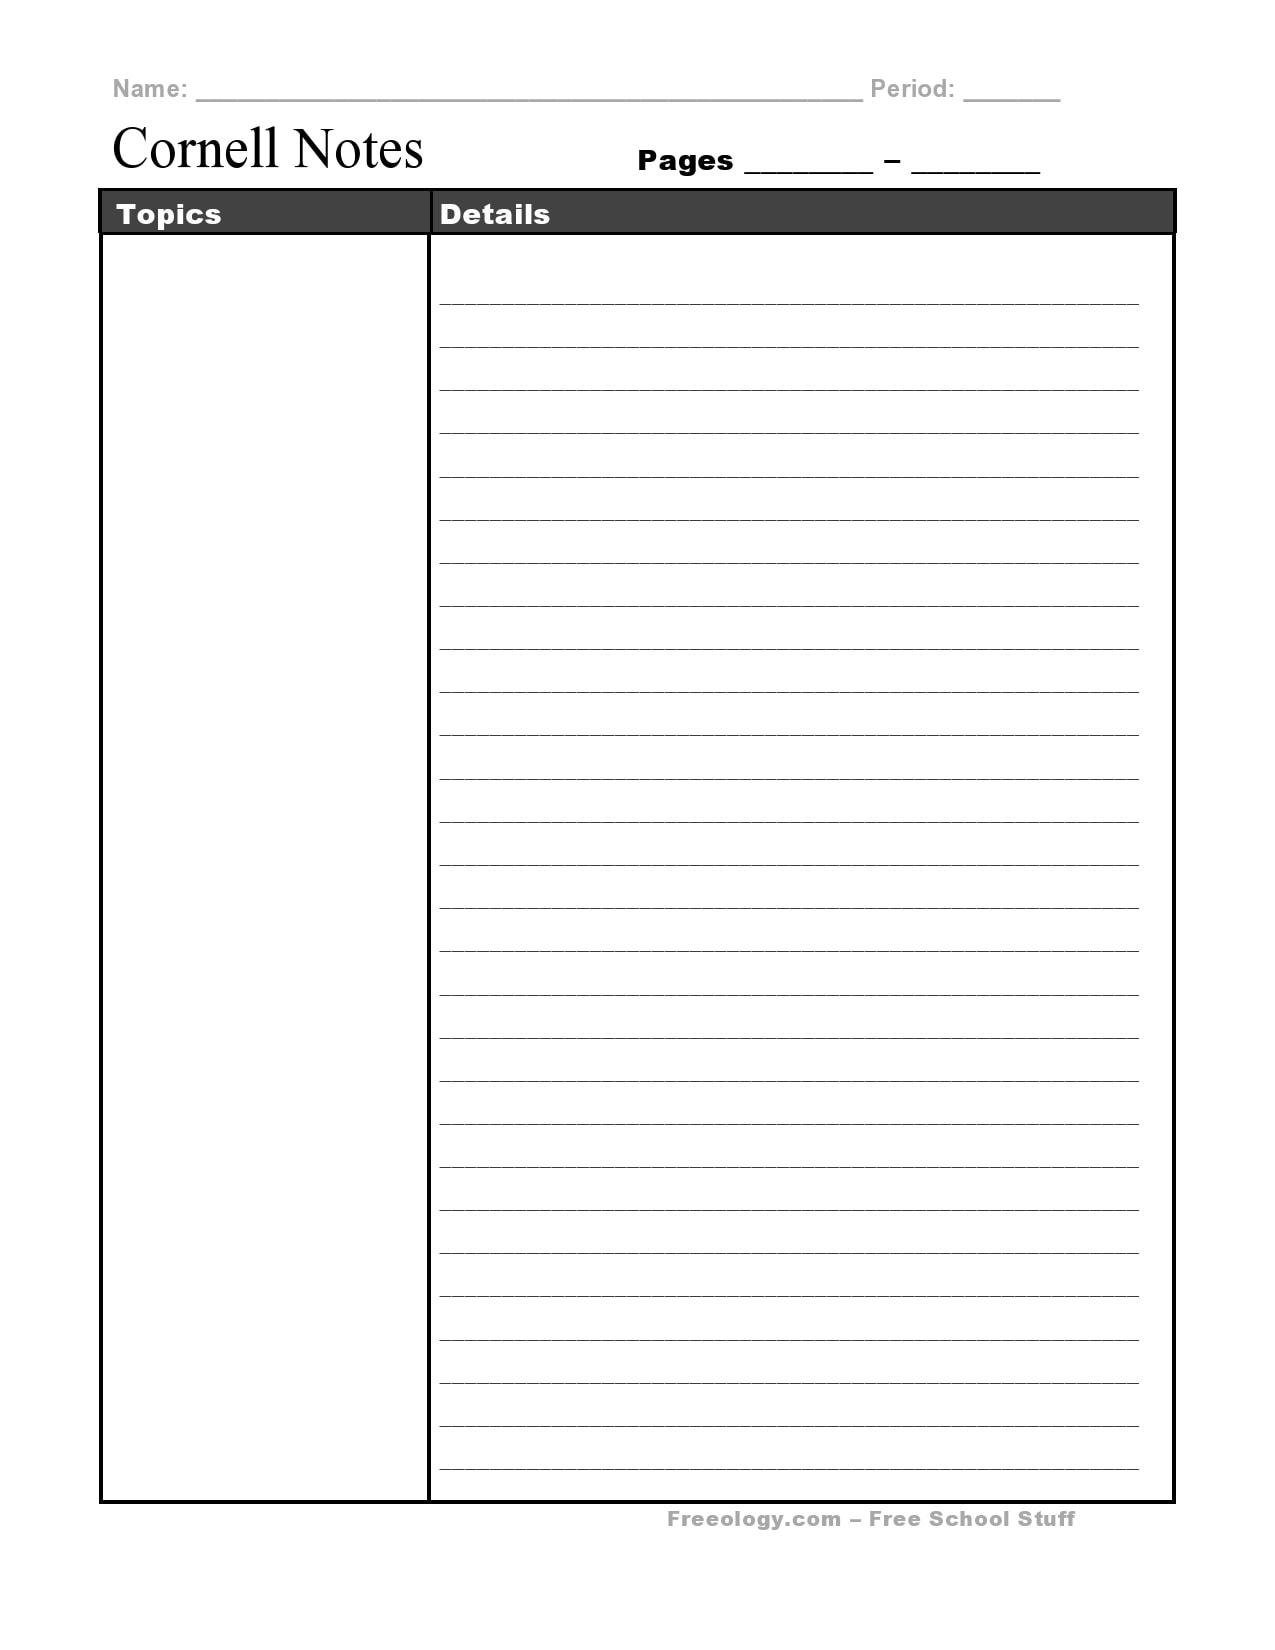 21 Printable Cornell Notes Templates [Free] - TemplateArchive Regarding Note Taking Template Pdf